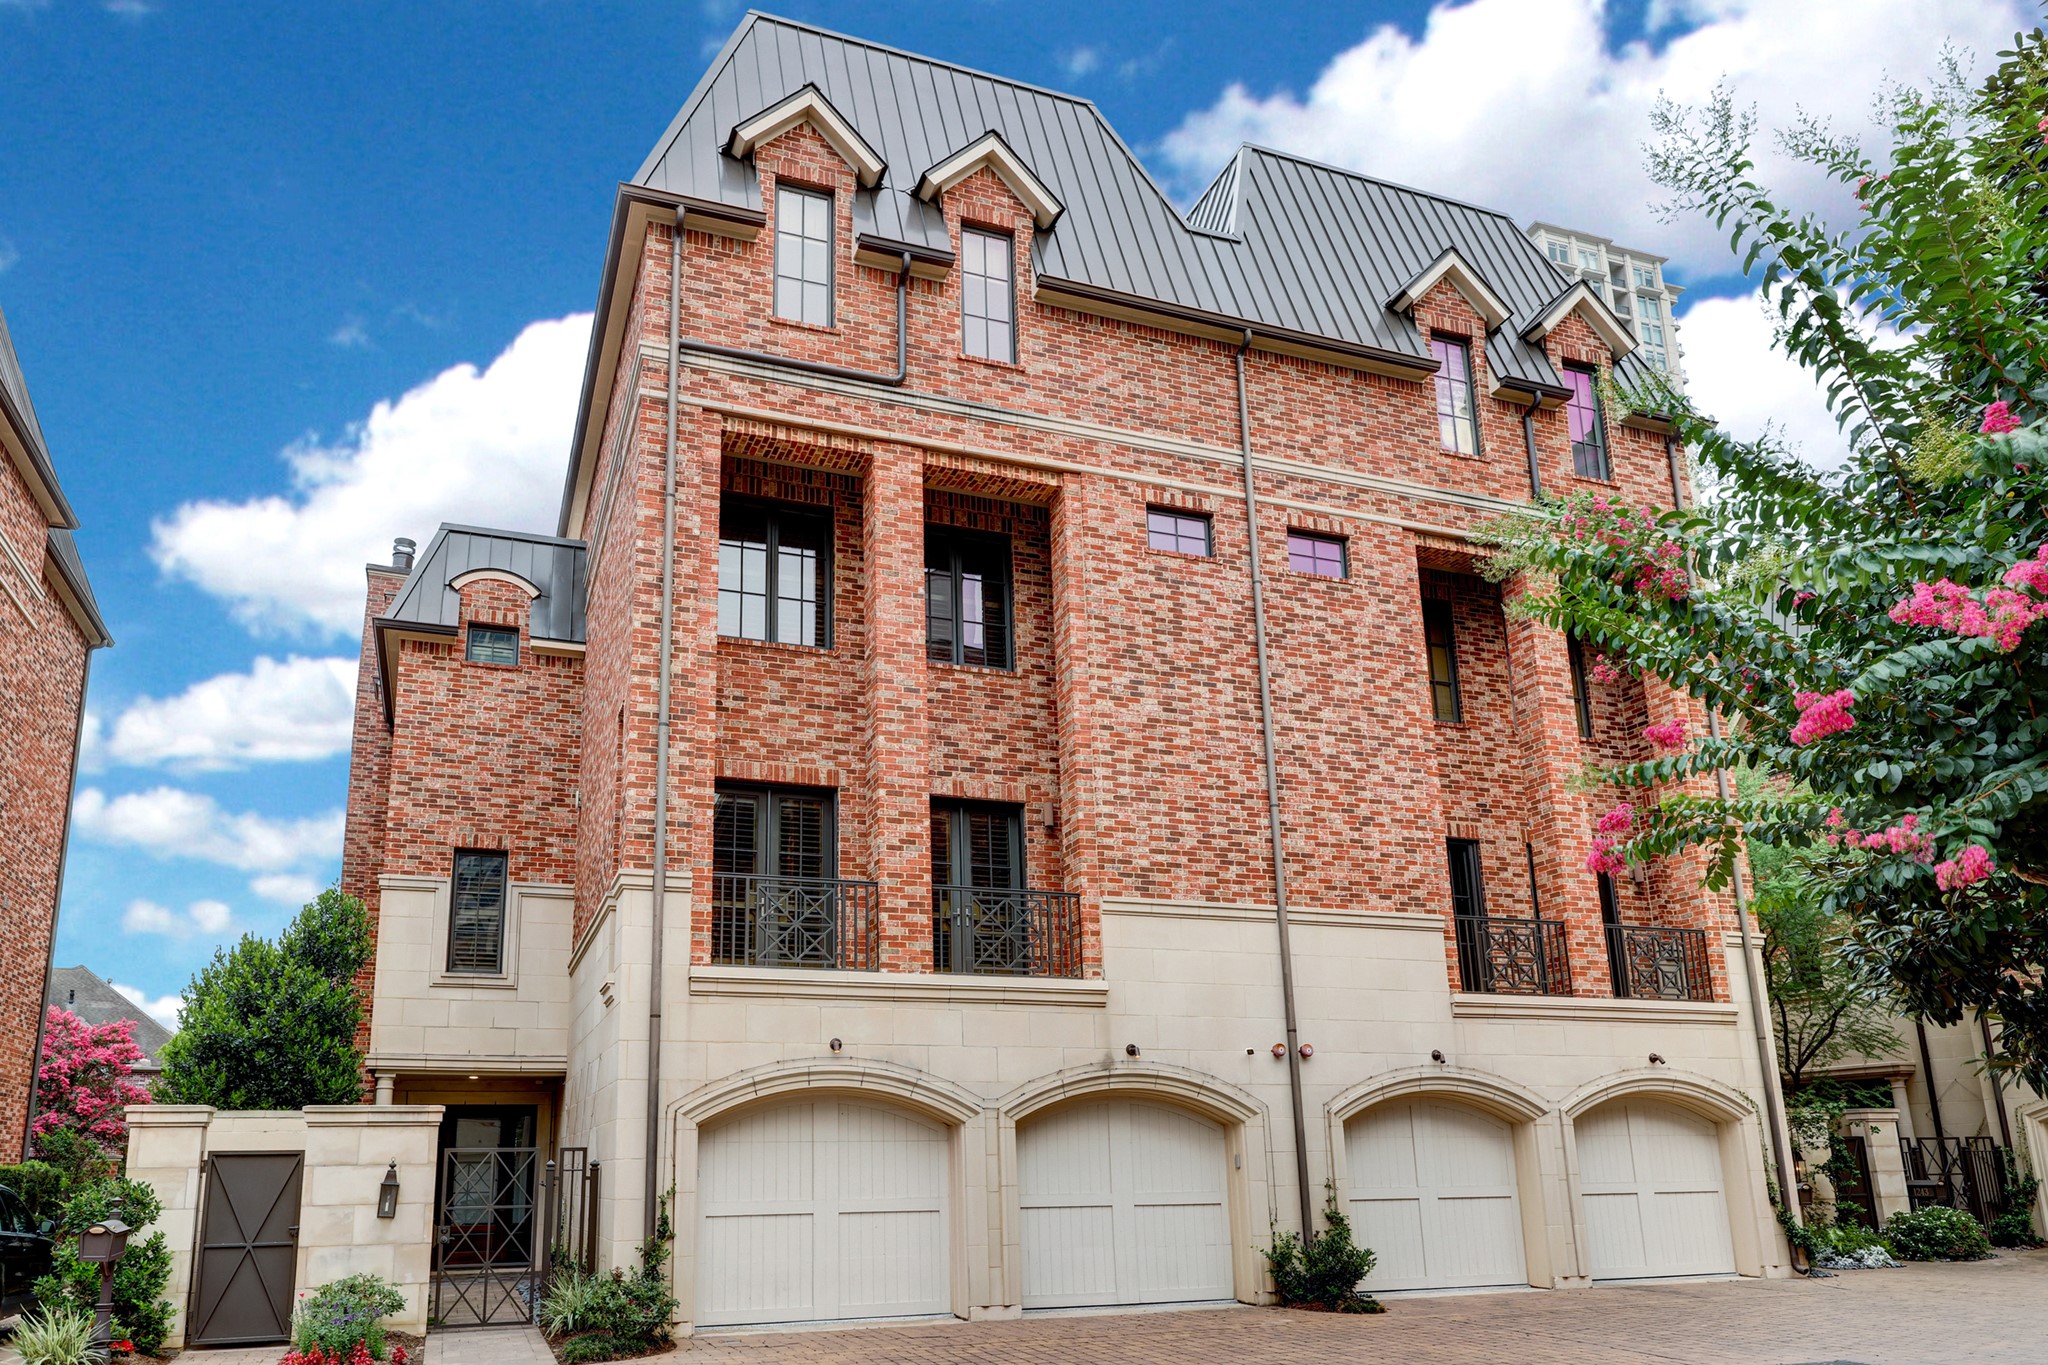 Wonderful private quiet gated community located in the heart of Uptown/Tanglewood/Galleria area!